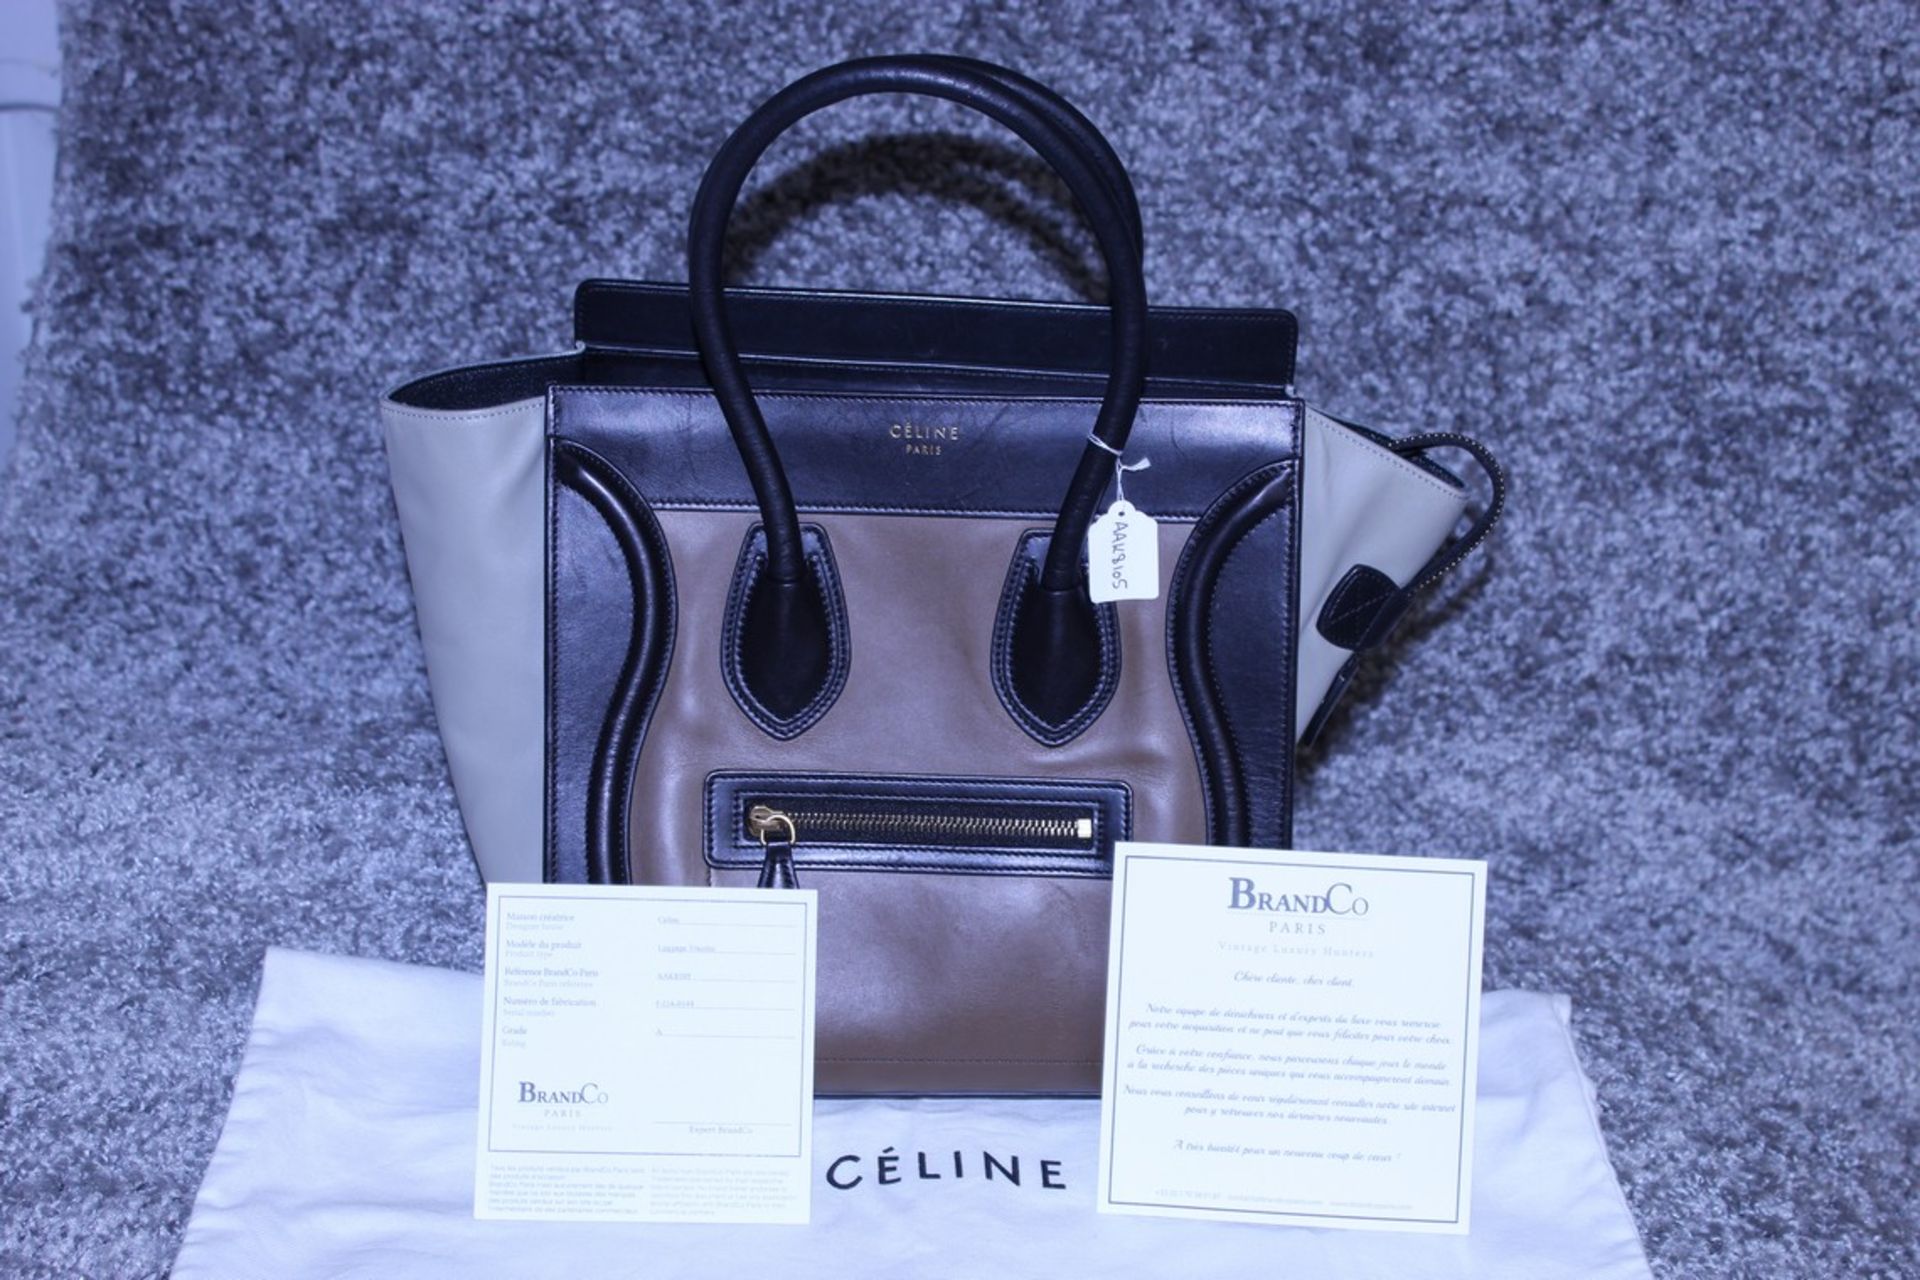 Rrp £1,500 Celine Luggage Tricol Handbag, Céline 'Mini Luggage'. Open Swith A Zipper On Top And Is - Image 4 of 5